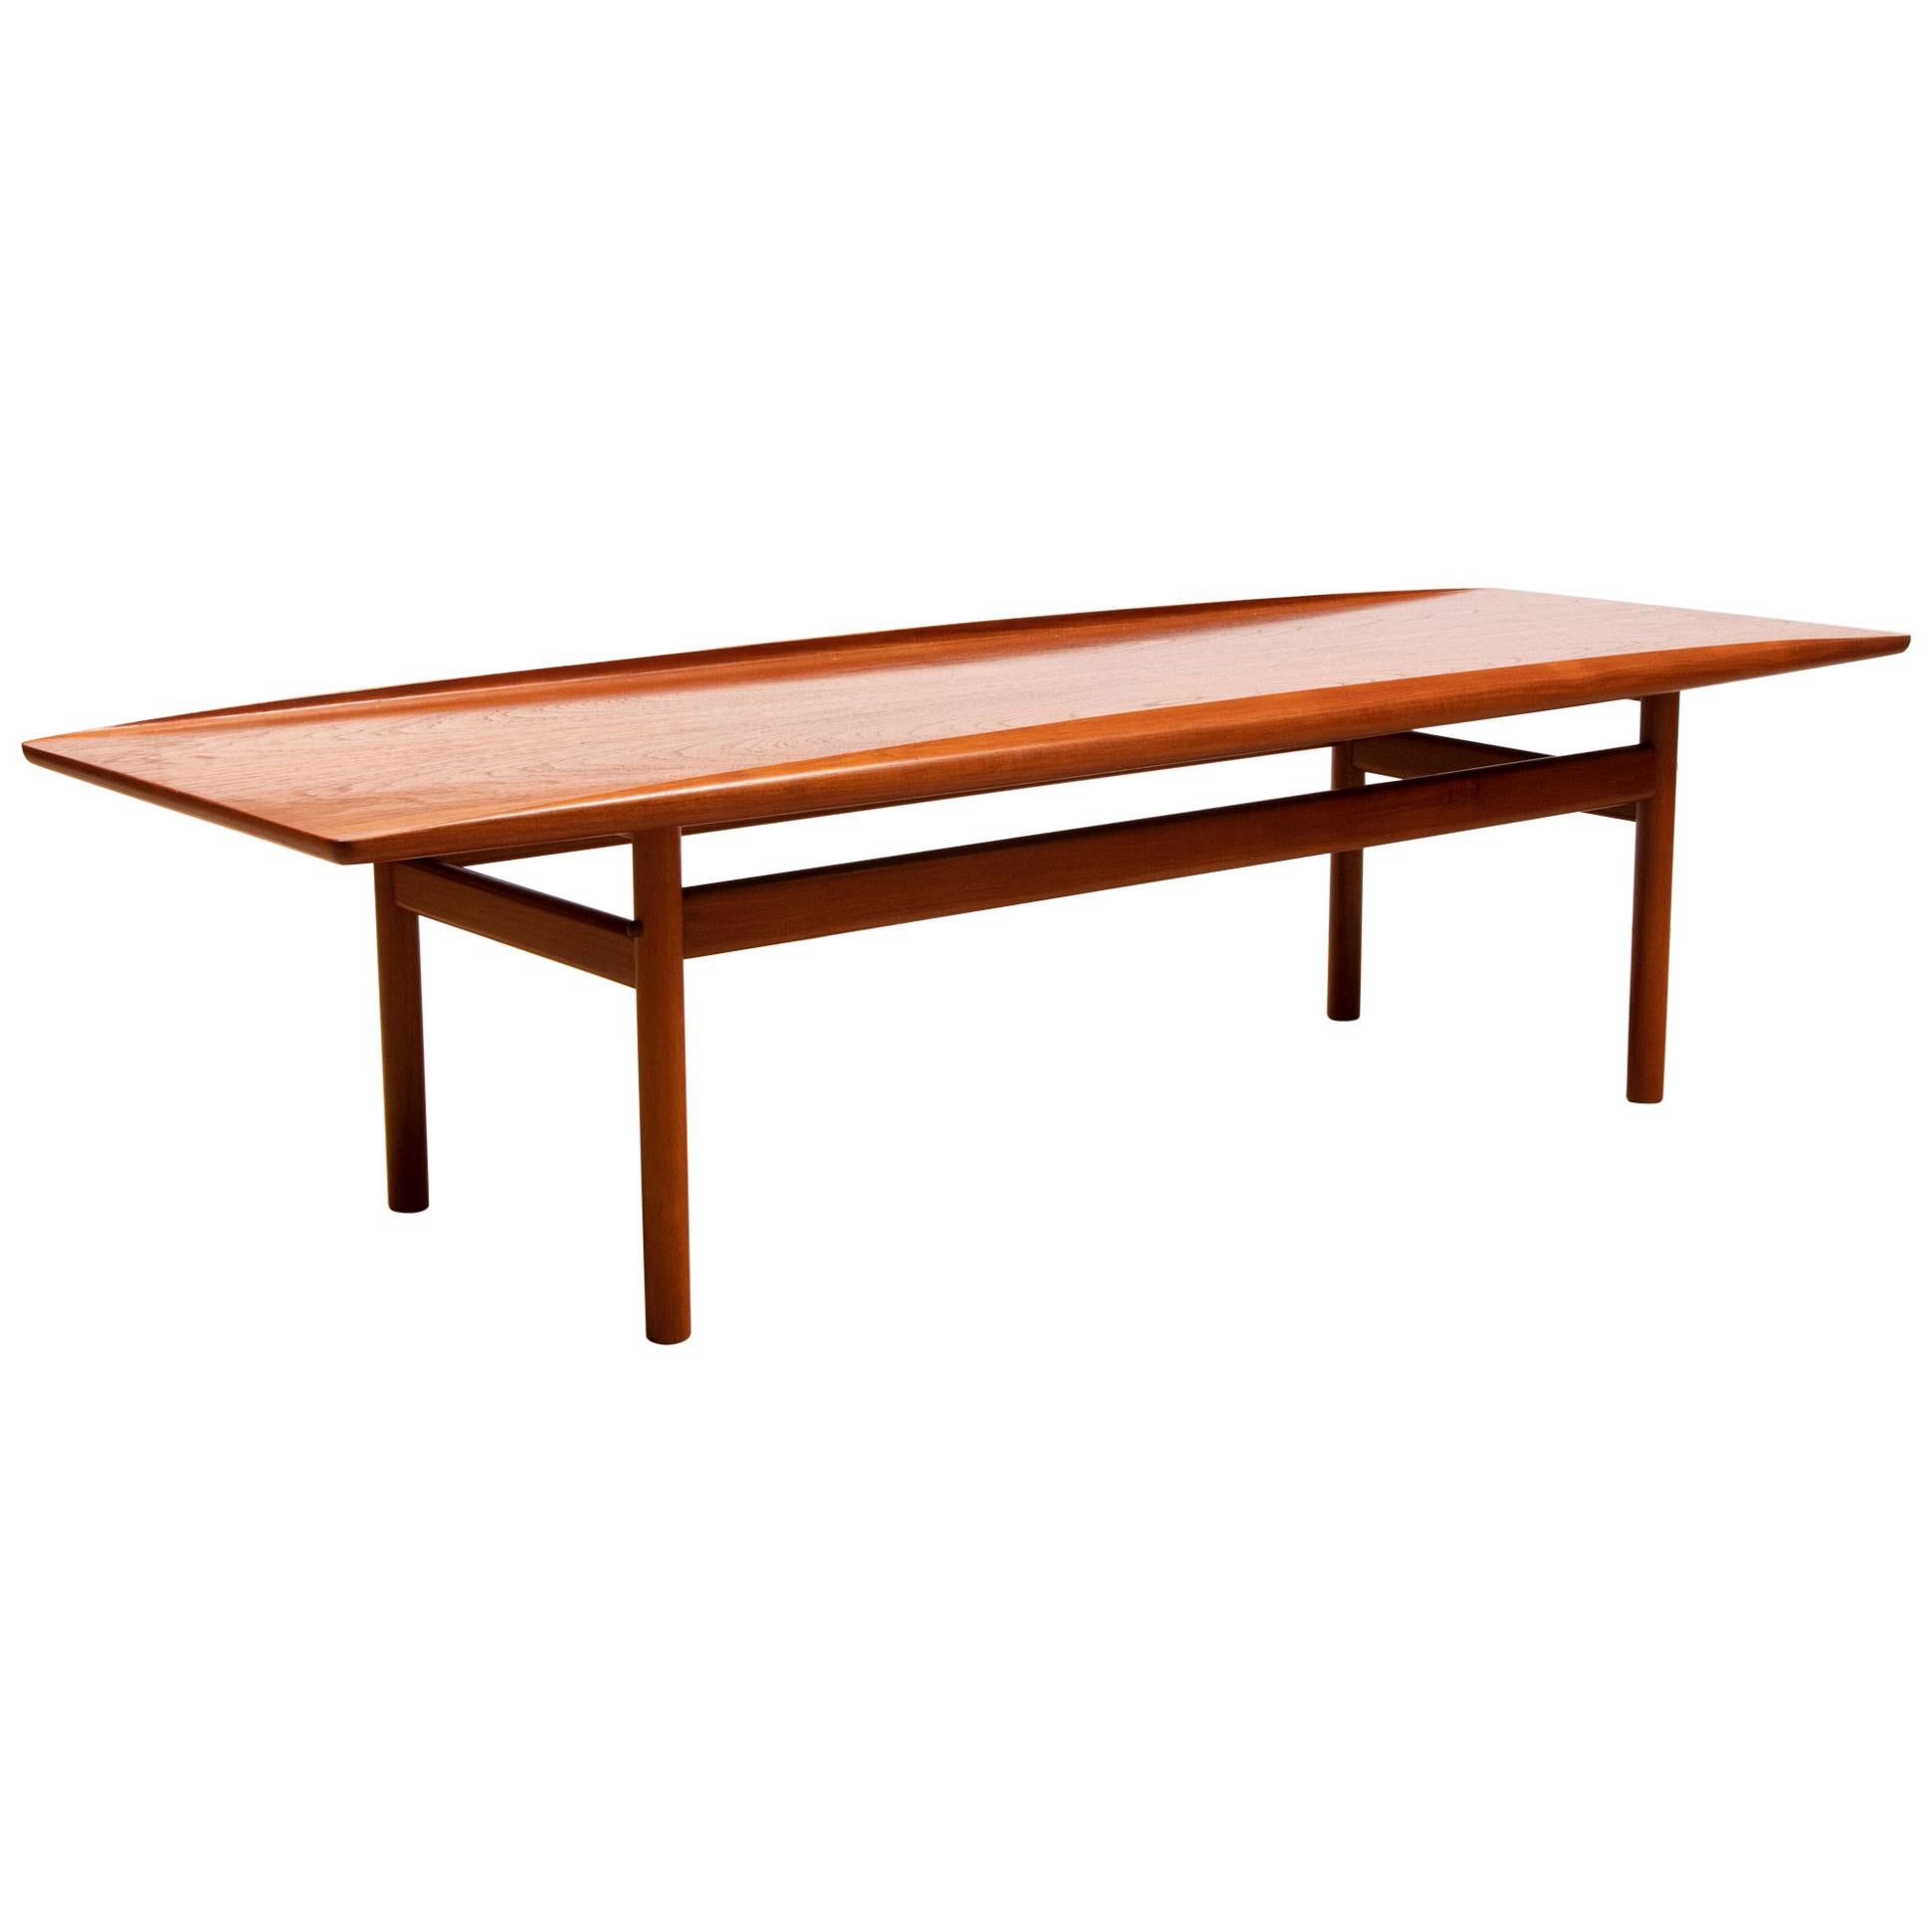 Midcentury Danish Teak Coffee Table by Grete Jalk for Poul Jeppesen, circa 1960 For Sale